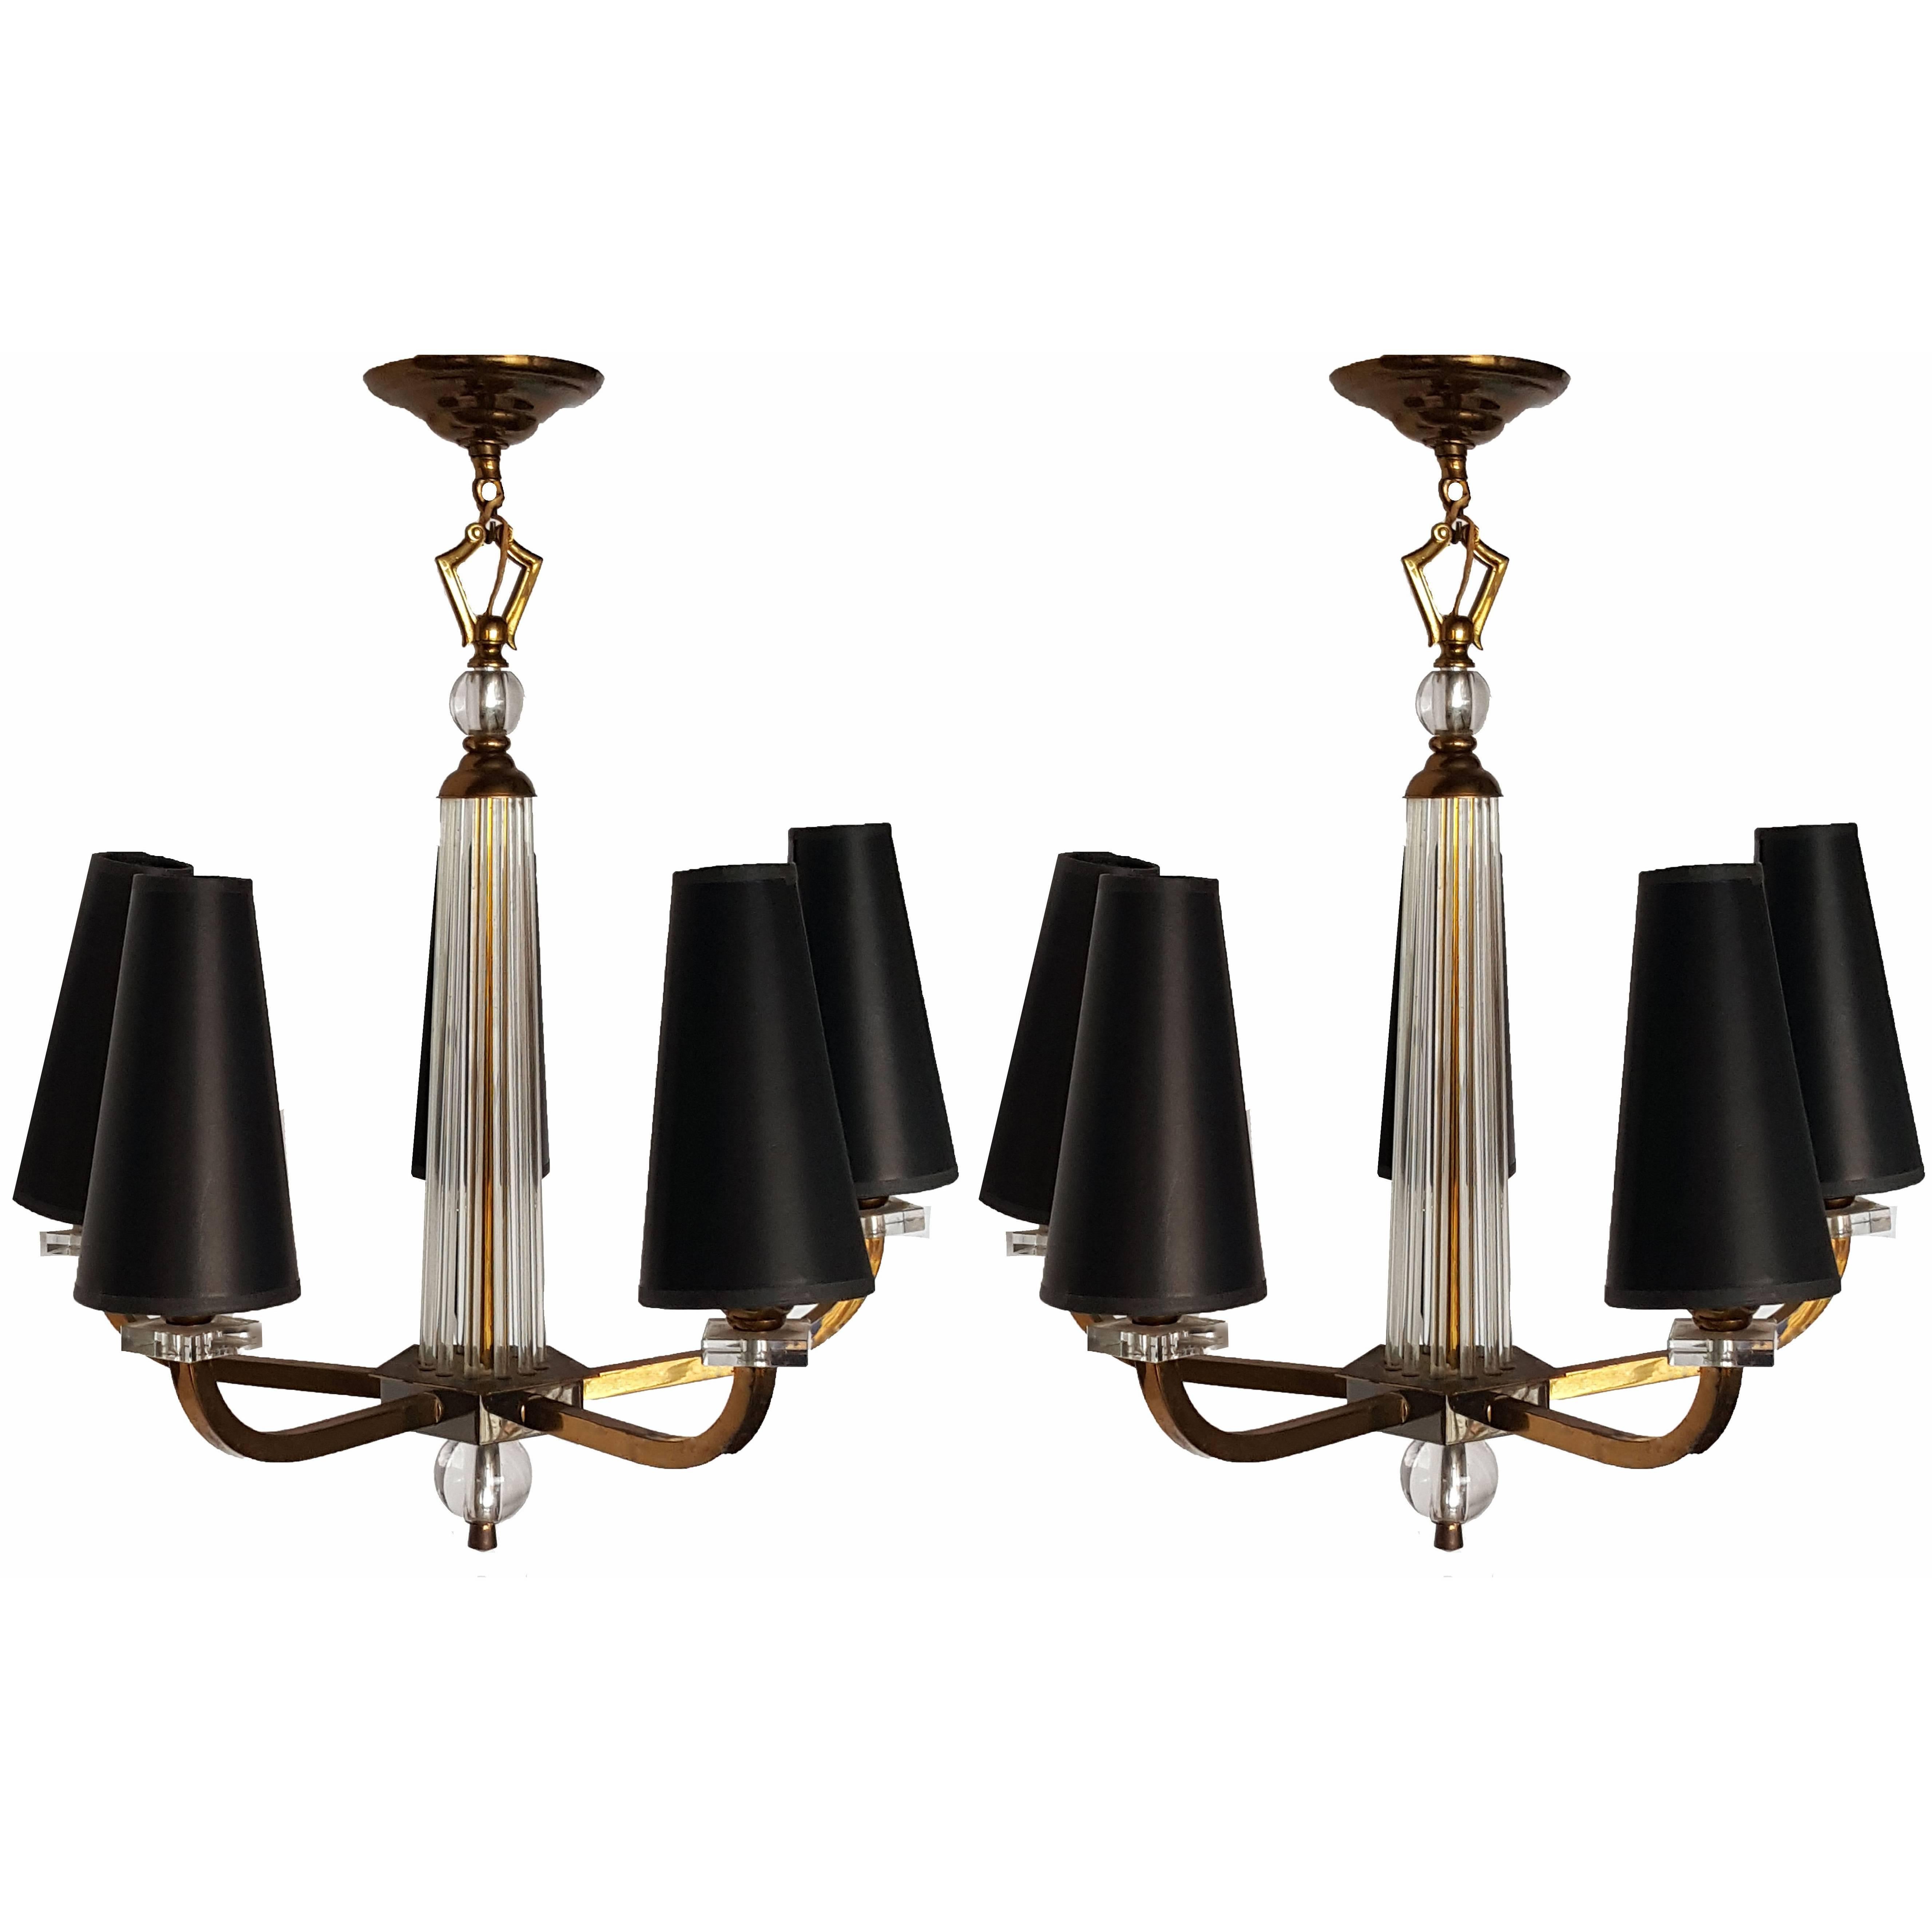 Pair of 5-light Jacques Adnet Chandeliers